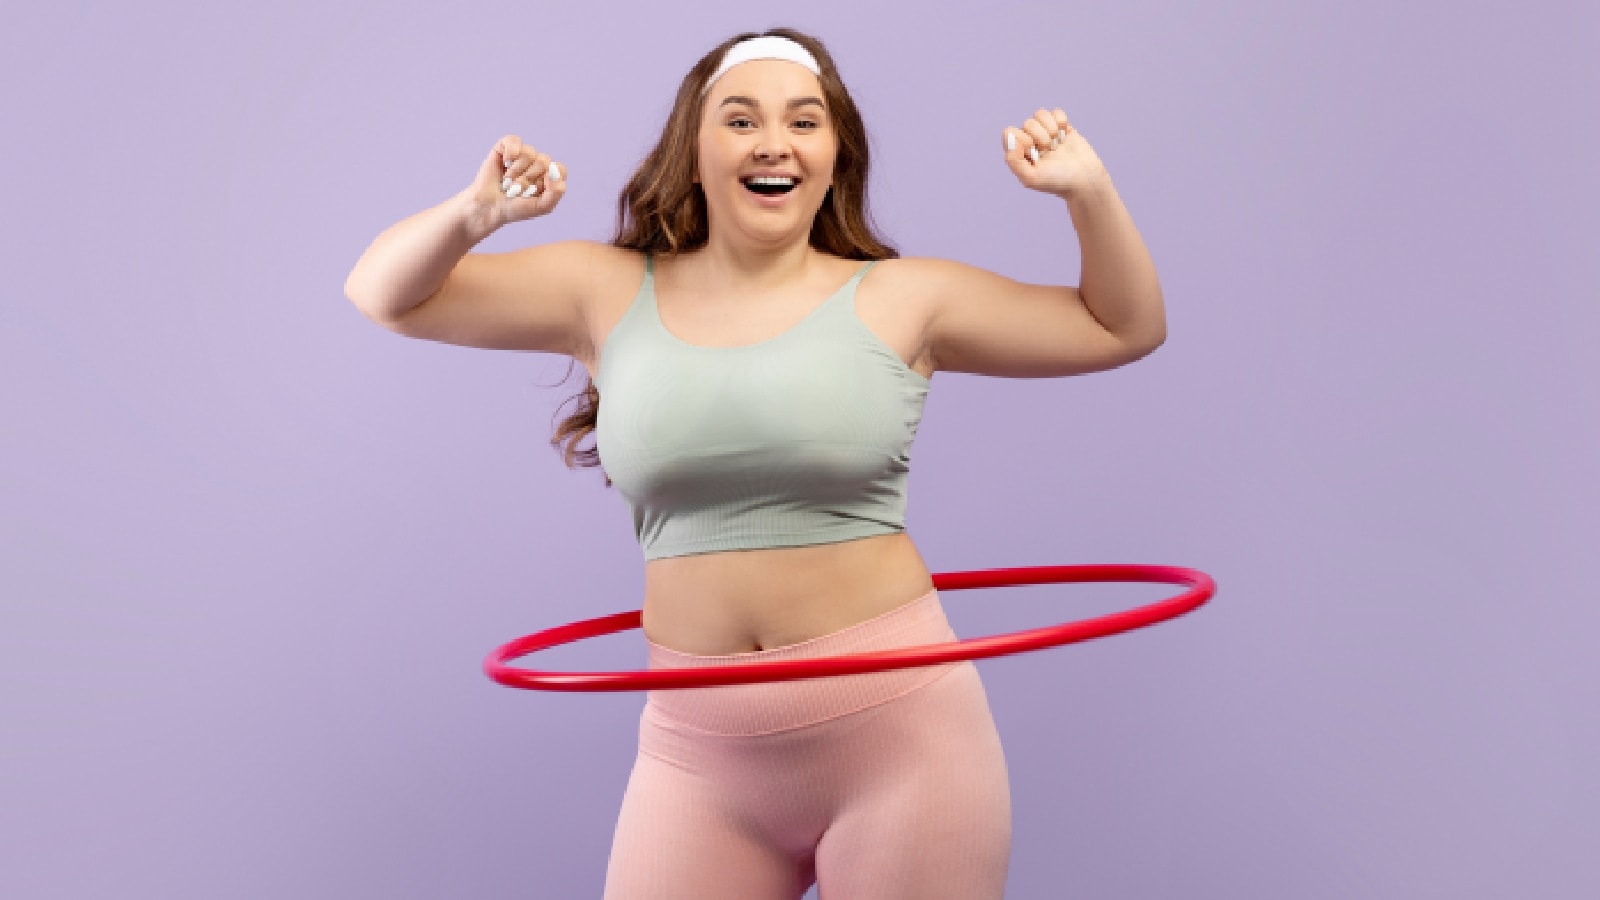 Hula hoop your way to weight loss with these exercises